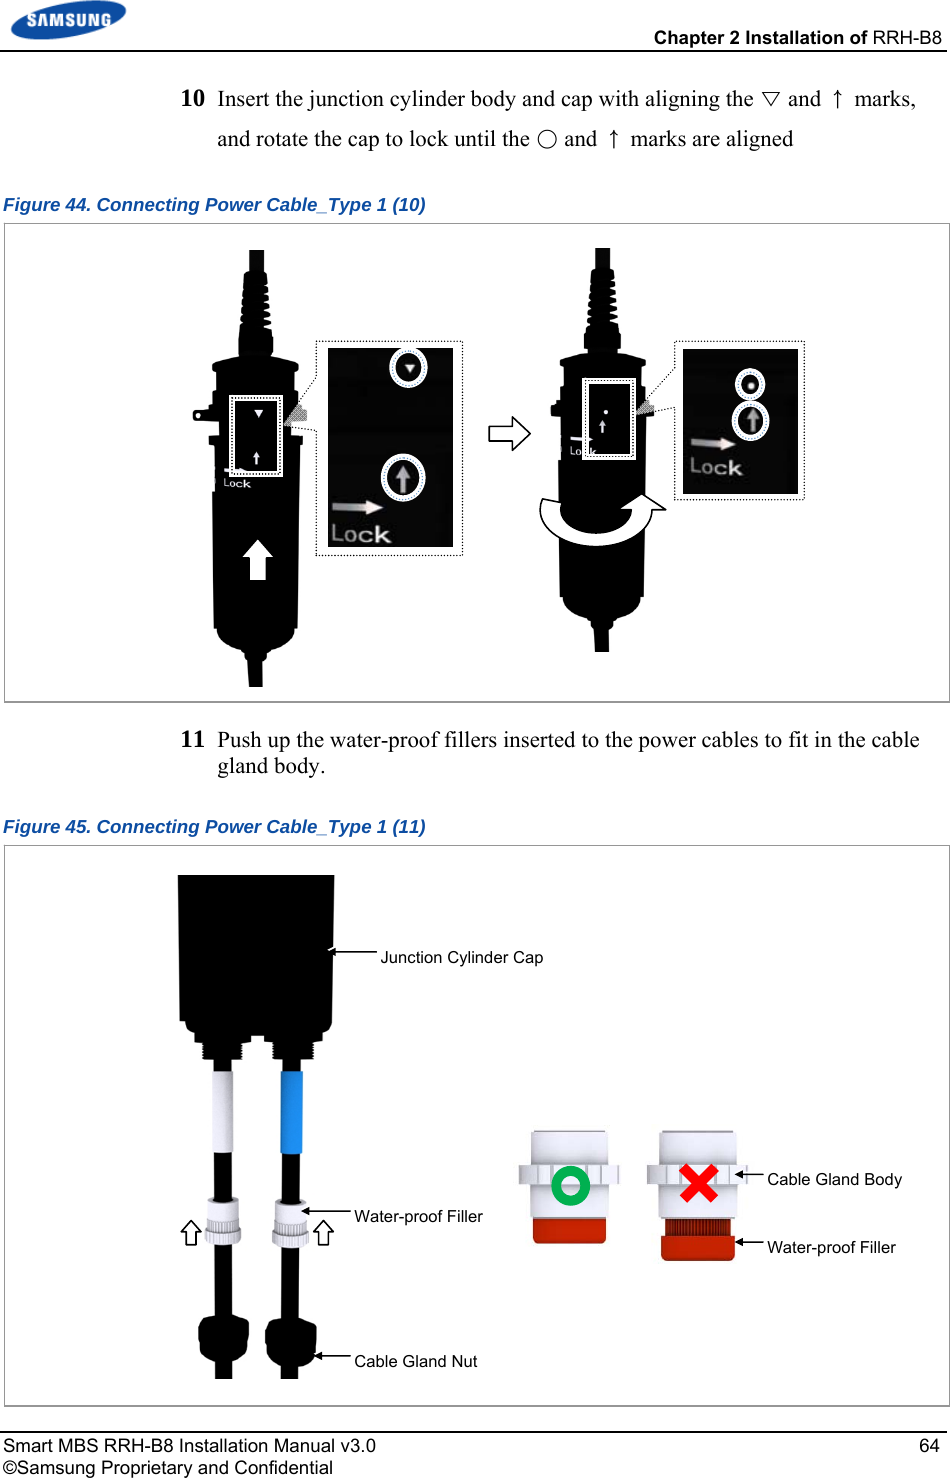  Chapter 2 Installation of RRH-B8 Smart MBS RRH-B8 Installation Manual v3.0   64 ©Samsung Proprietary and Confidential 10  Insert the junction cylinder body and cap with aligning the ▽ and ↑ marks, and rotate the cap to lock until the ○ and ↑ marks are aligned Figure 44. Connecting Power Cable_Type 1 (10)  11  Push up the water-proof fillers inserted to the power cables to fit in the cable gland body. Figure 45. Connecting Power Cable_Type 1 (11)  Water-proof FillerWater-proof FillerCable Gland BodyJunction Cylinder CapCable Gland Nut  